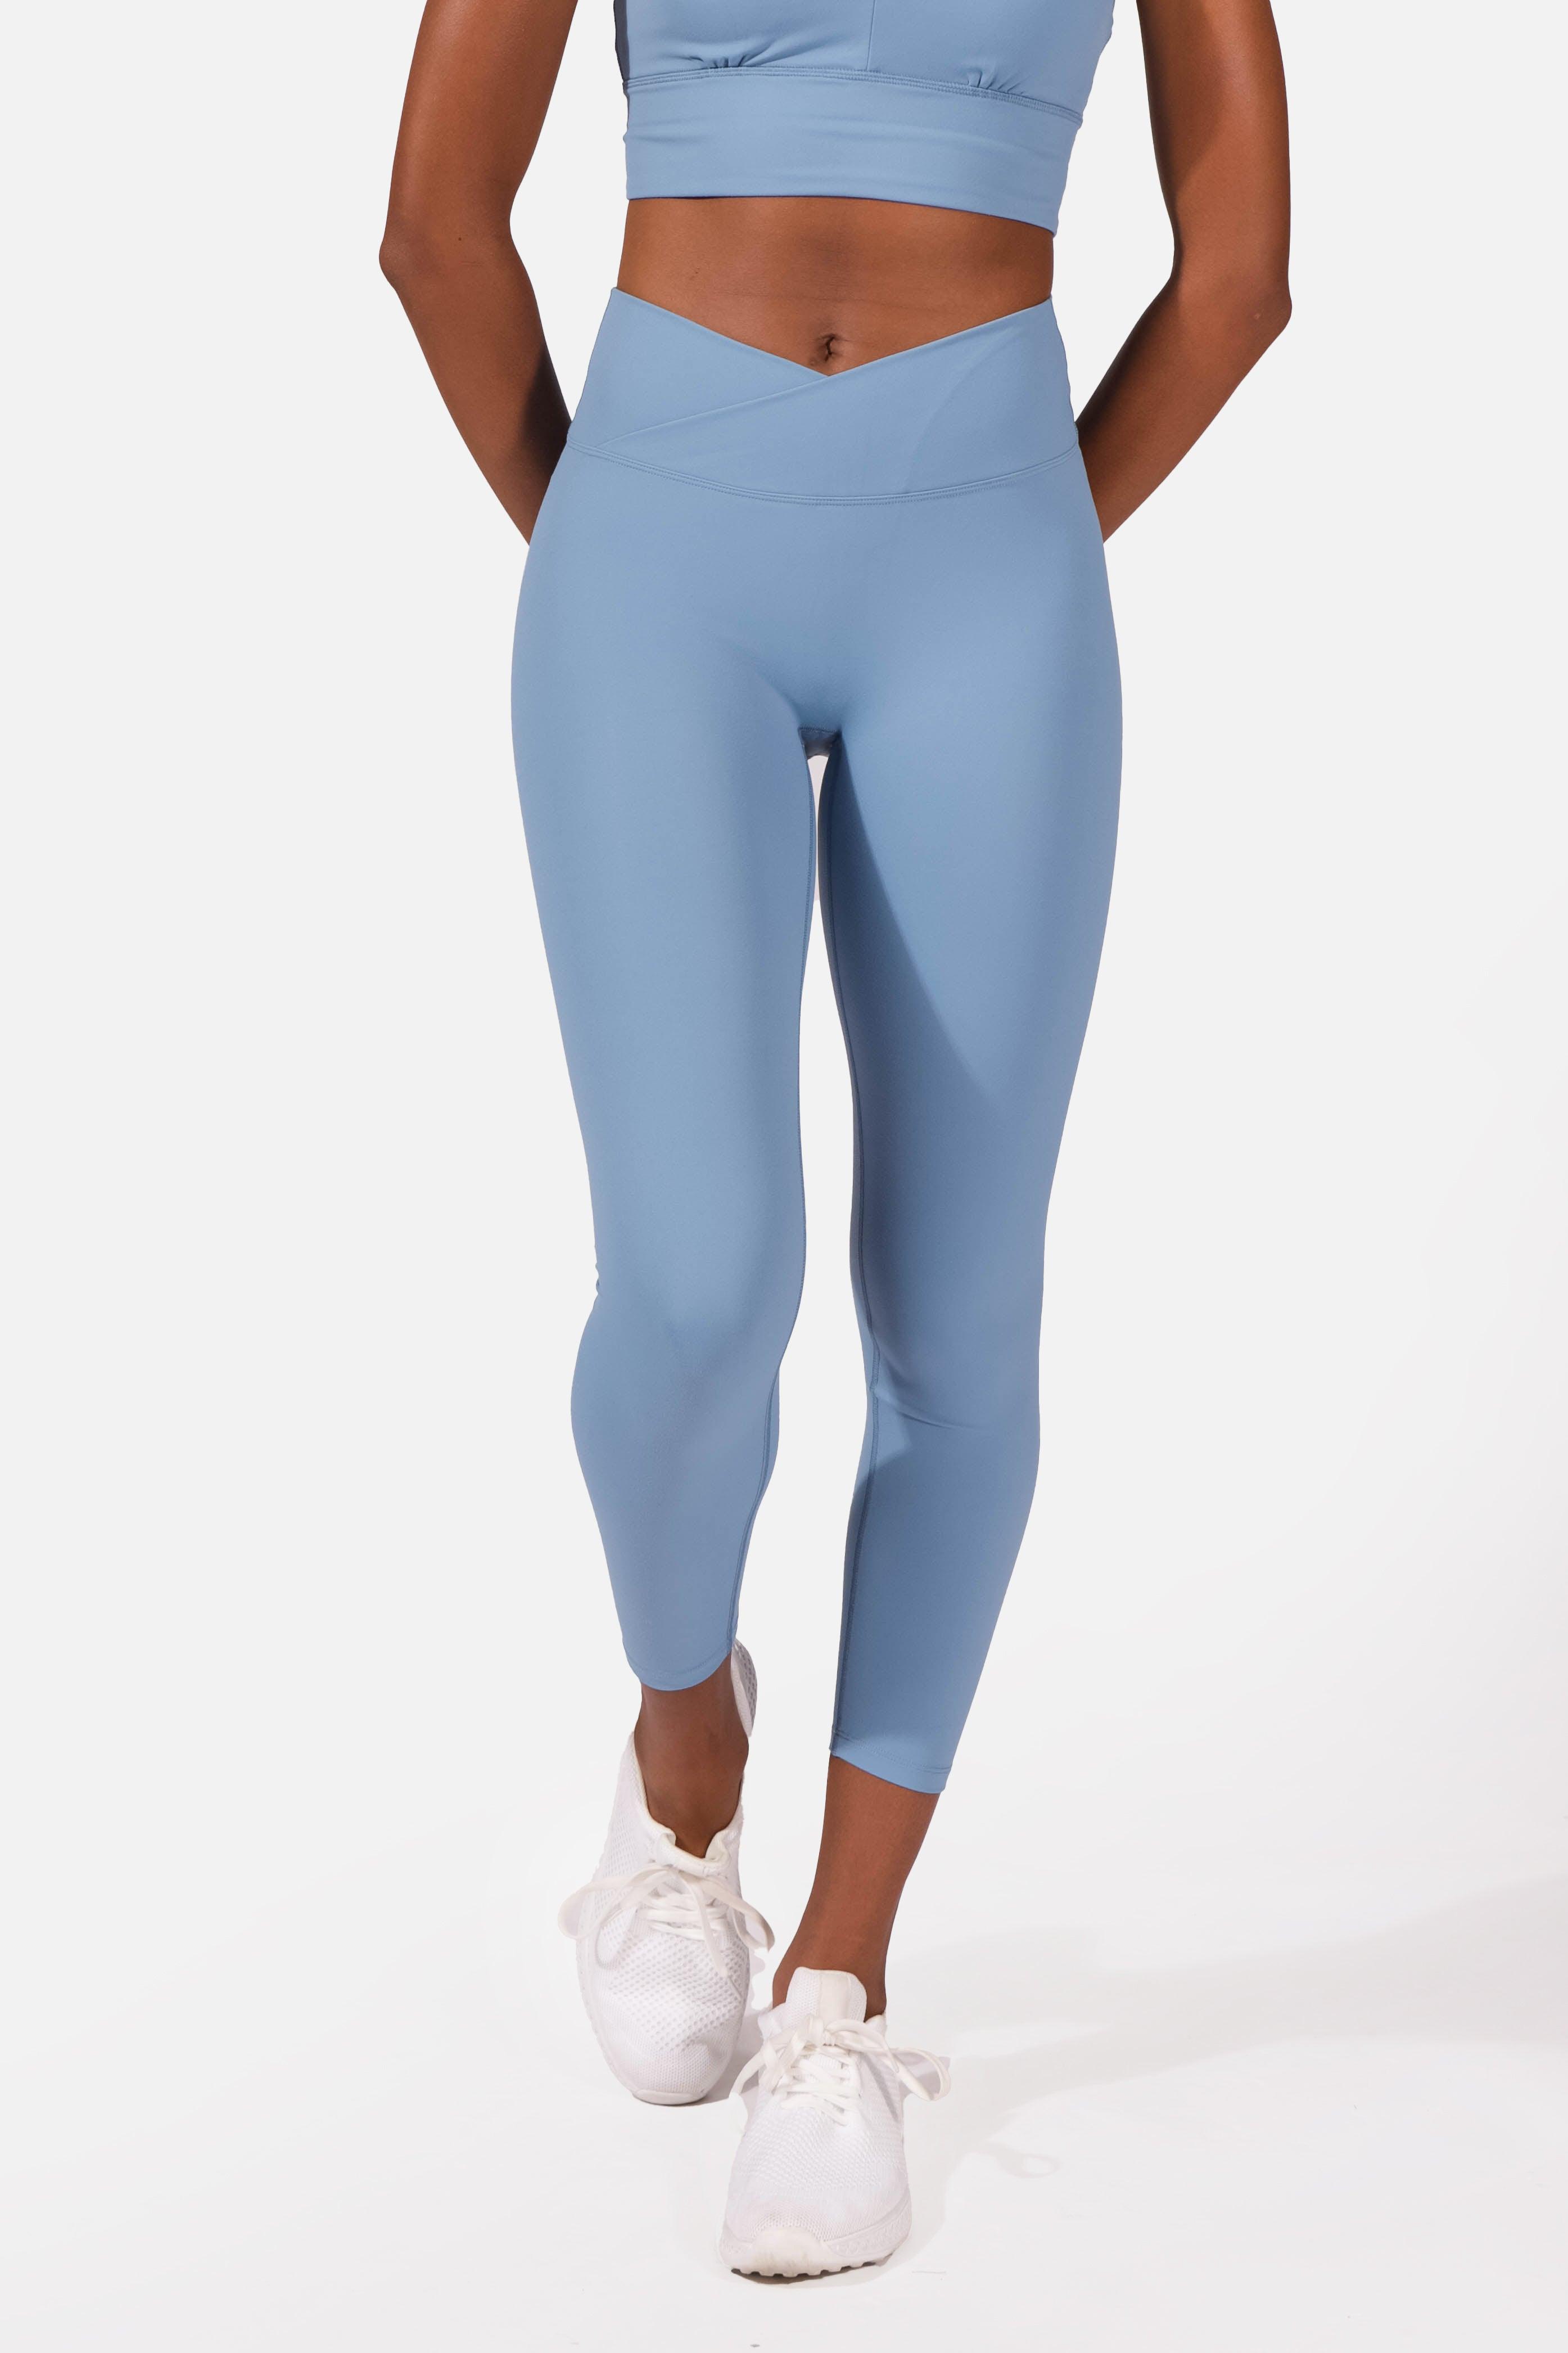 Cotton On Body Active Ultra Luxe Crossover 7 8 Tights in Blue